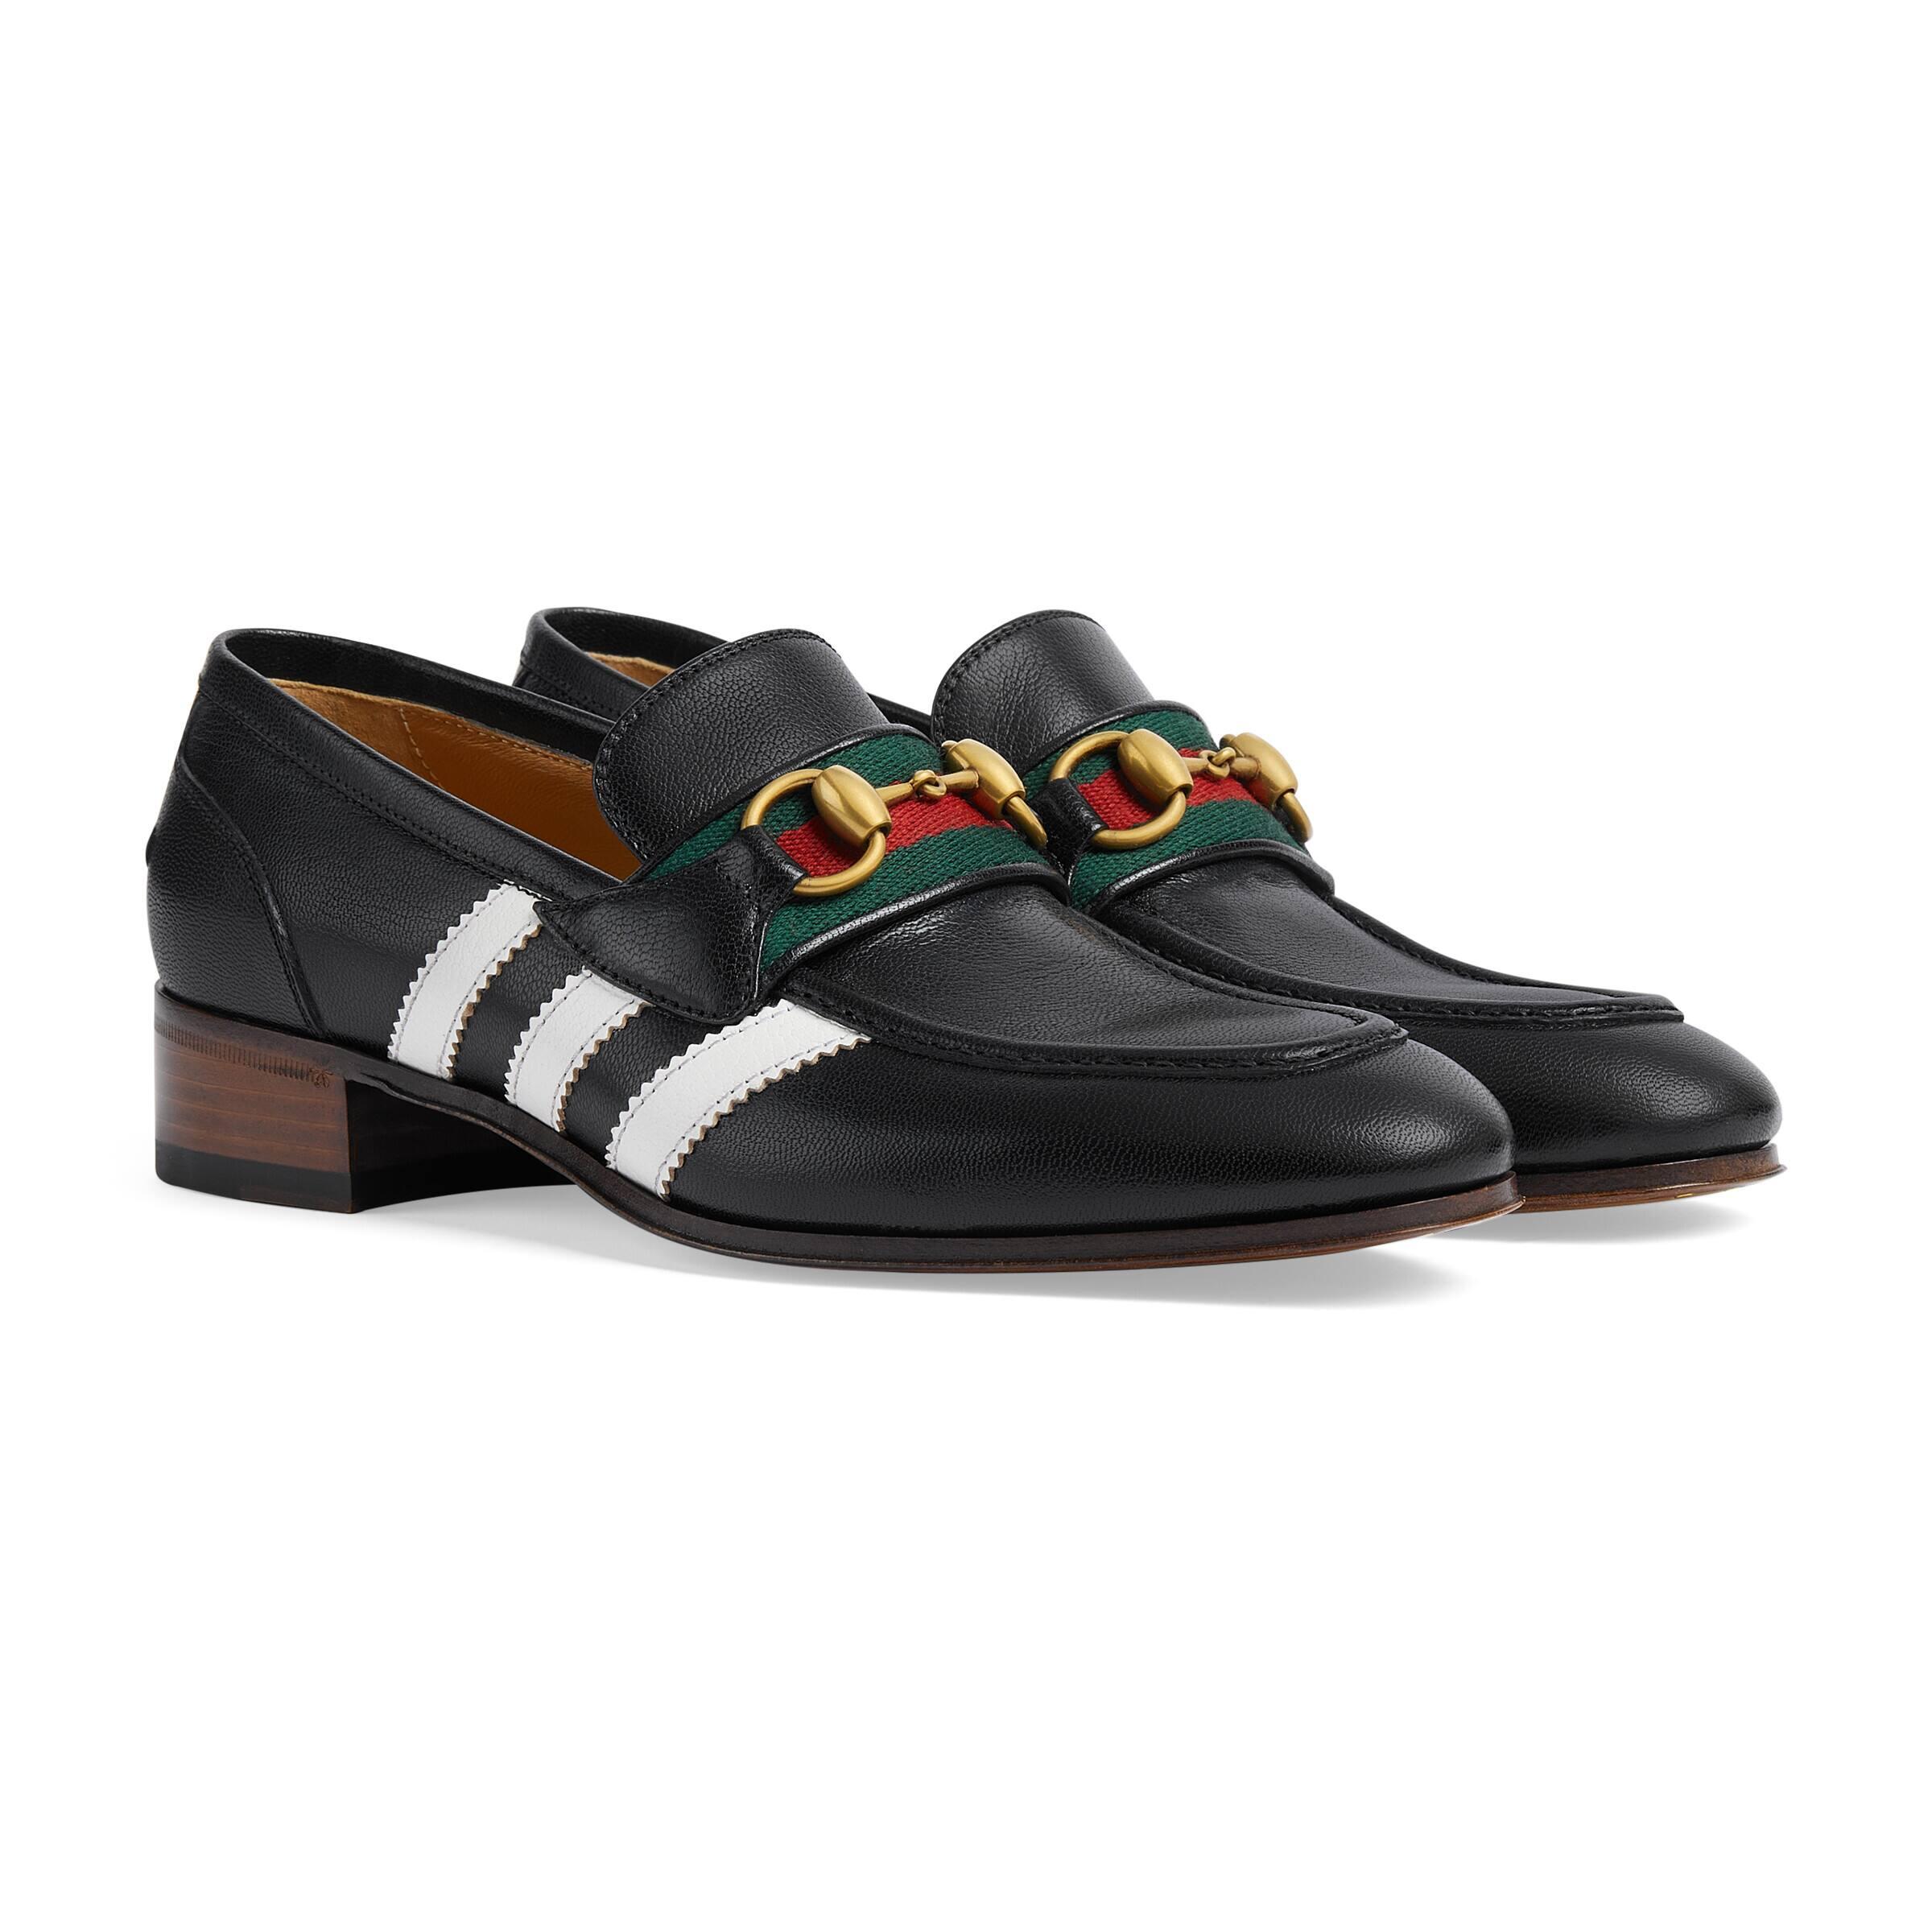 Gucci Adidas X Women's Loafer in Black | Lyst